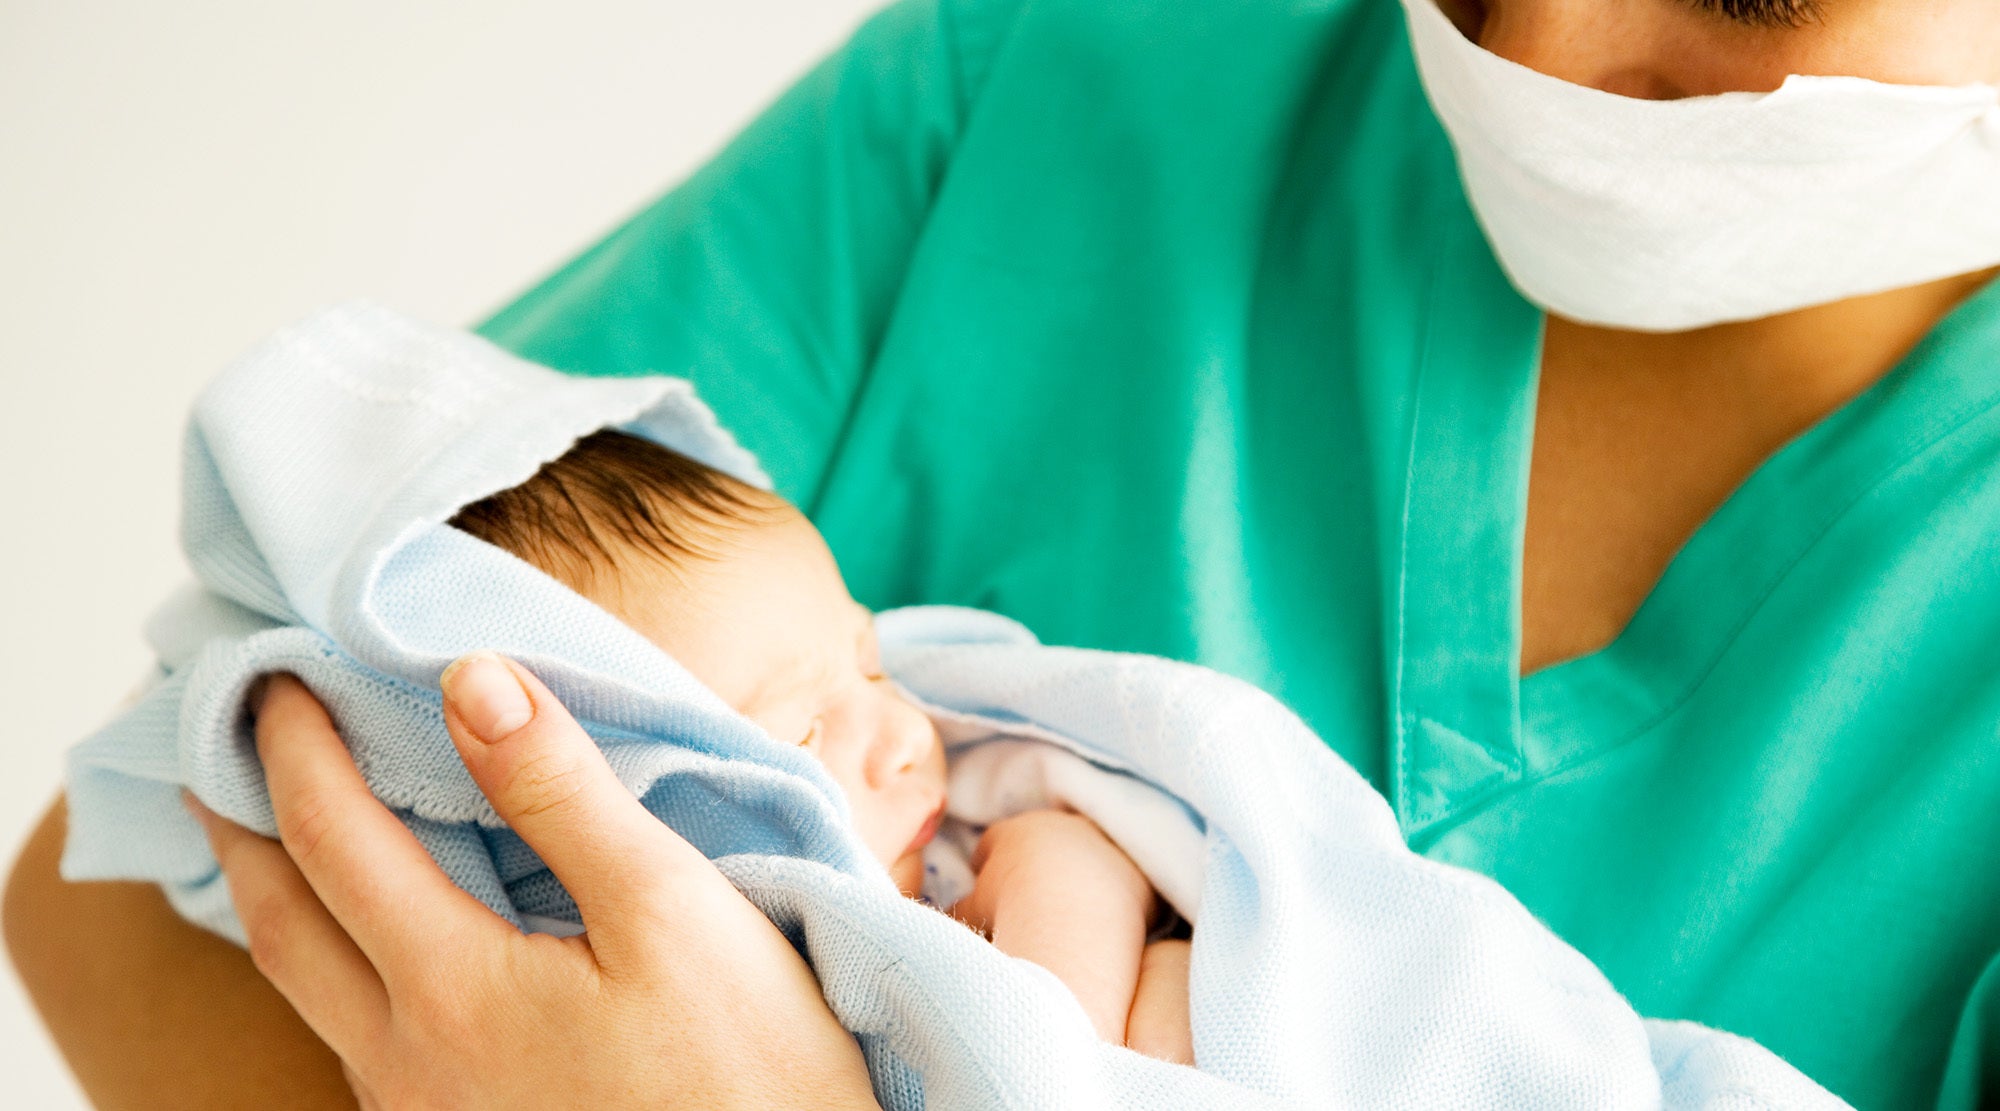 Midwife vs. OB-GYN: What’s the Difference?